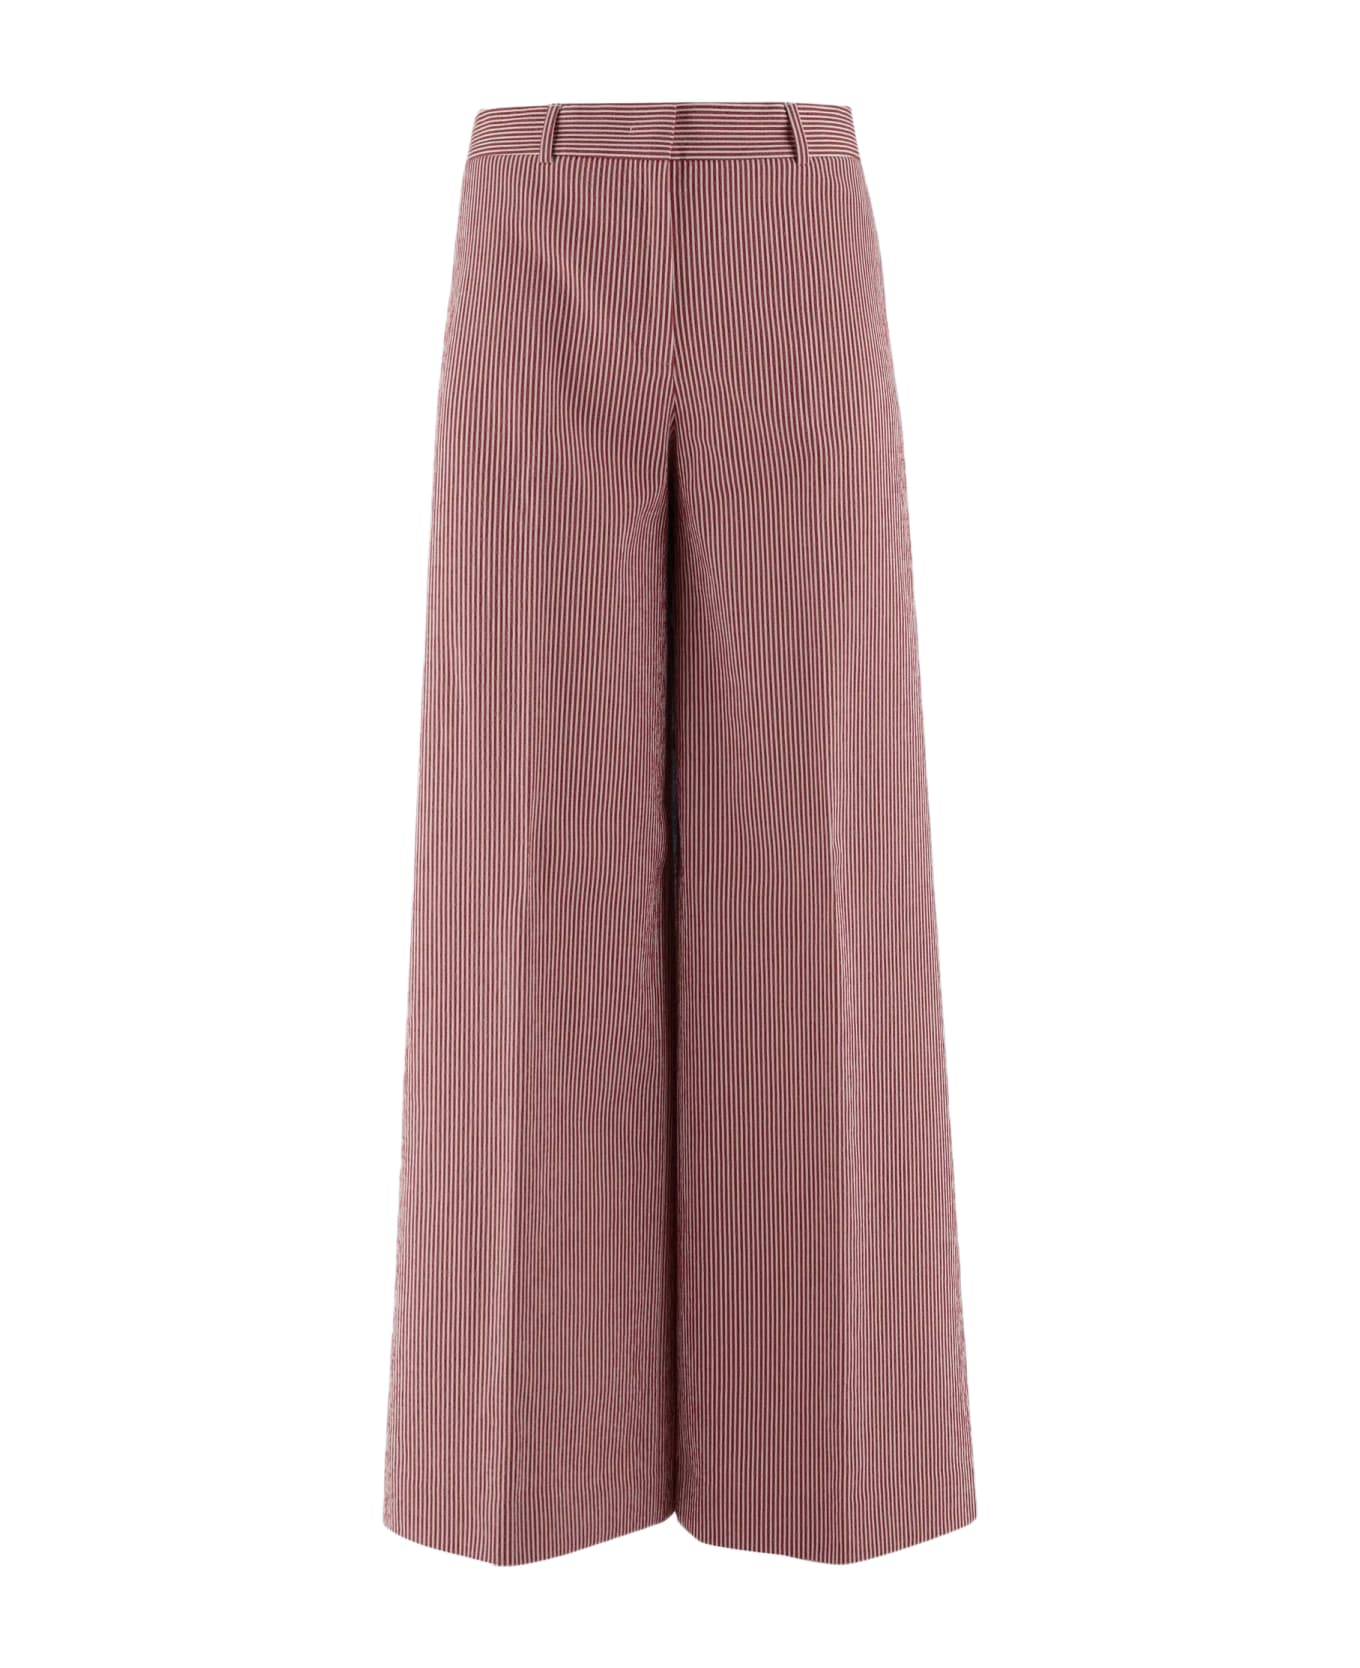 QL2 Cotton Blend Palazzo Pants - Red ボトムス